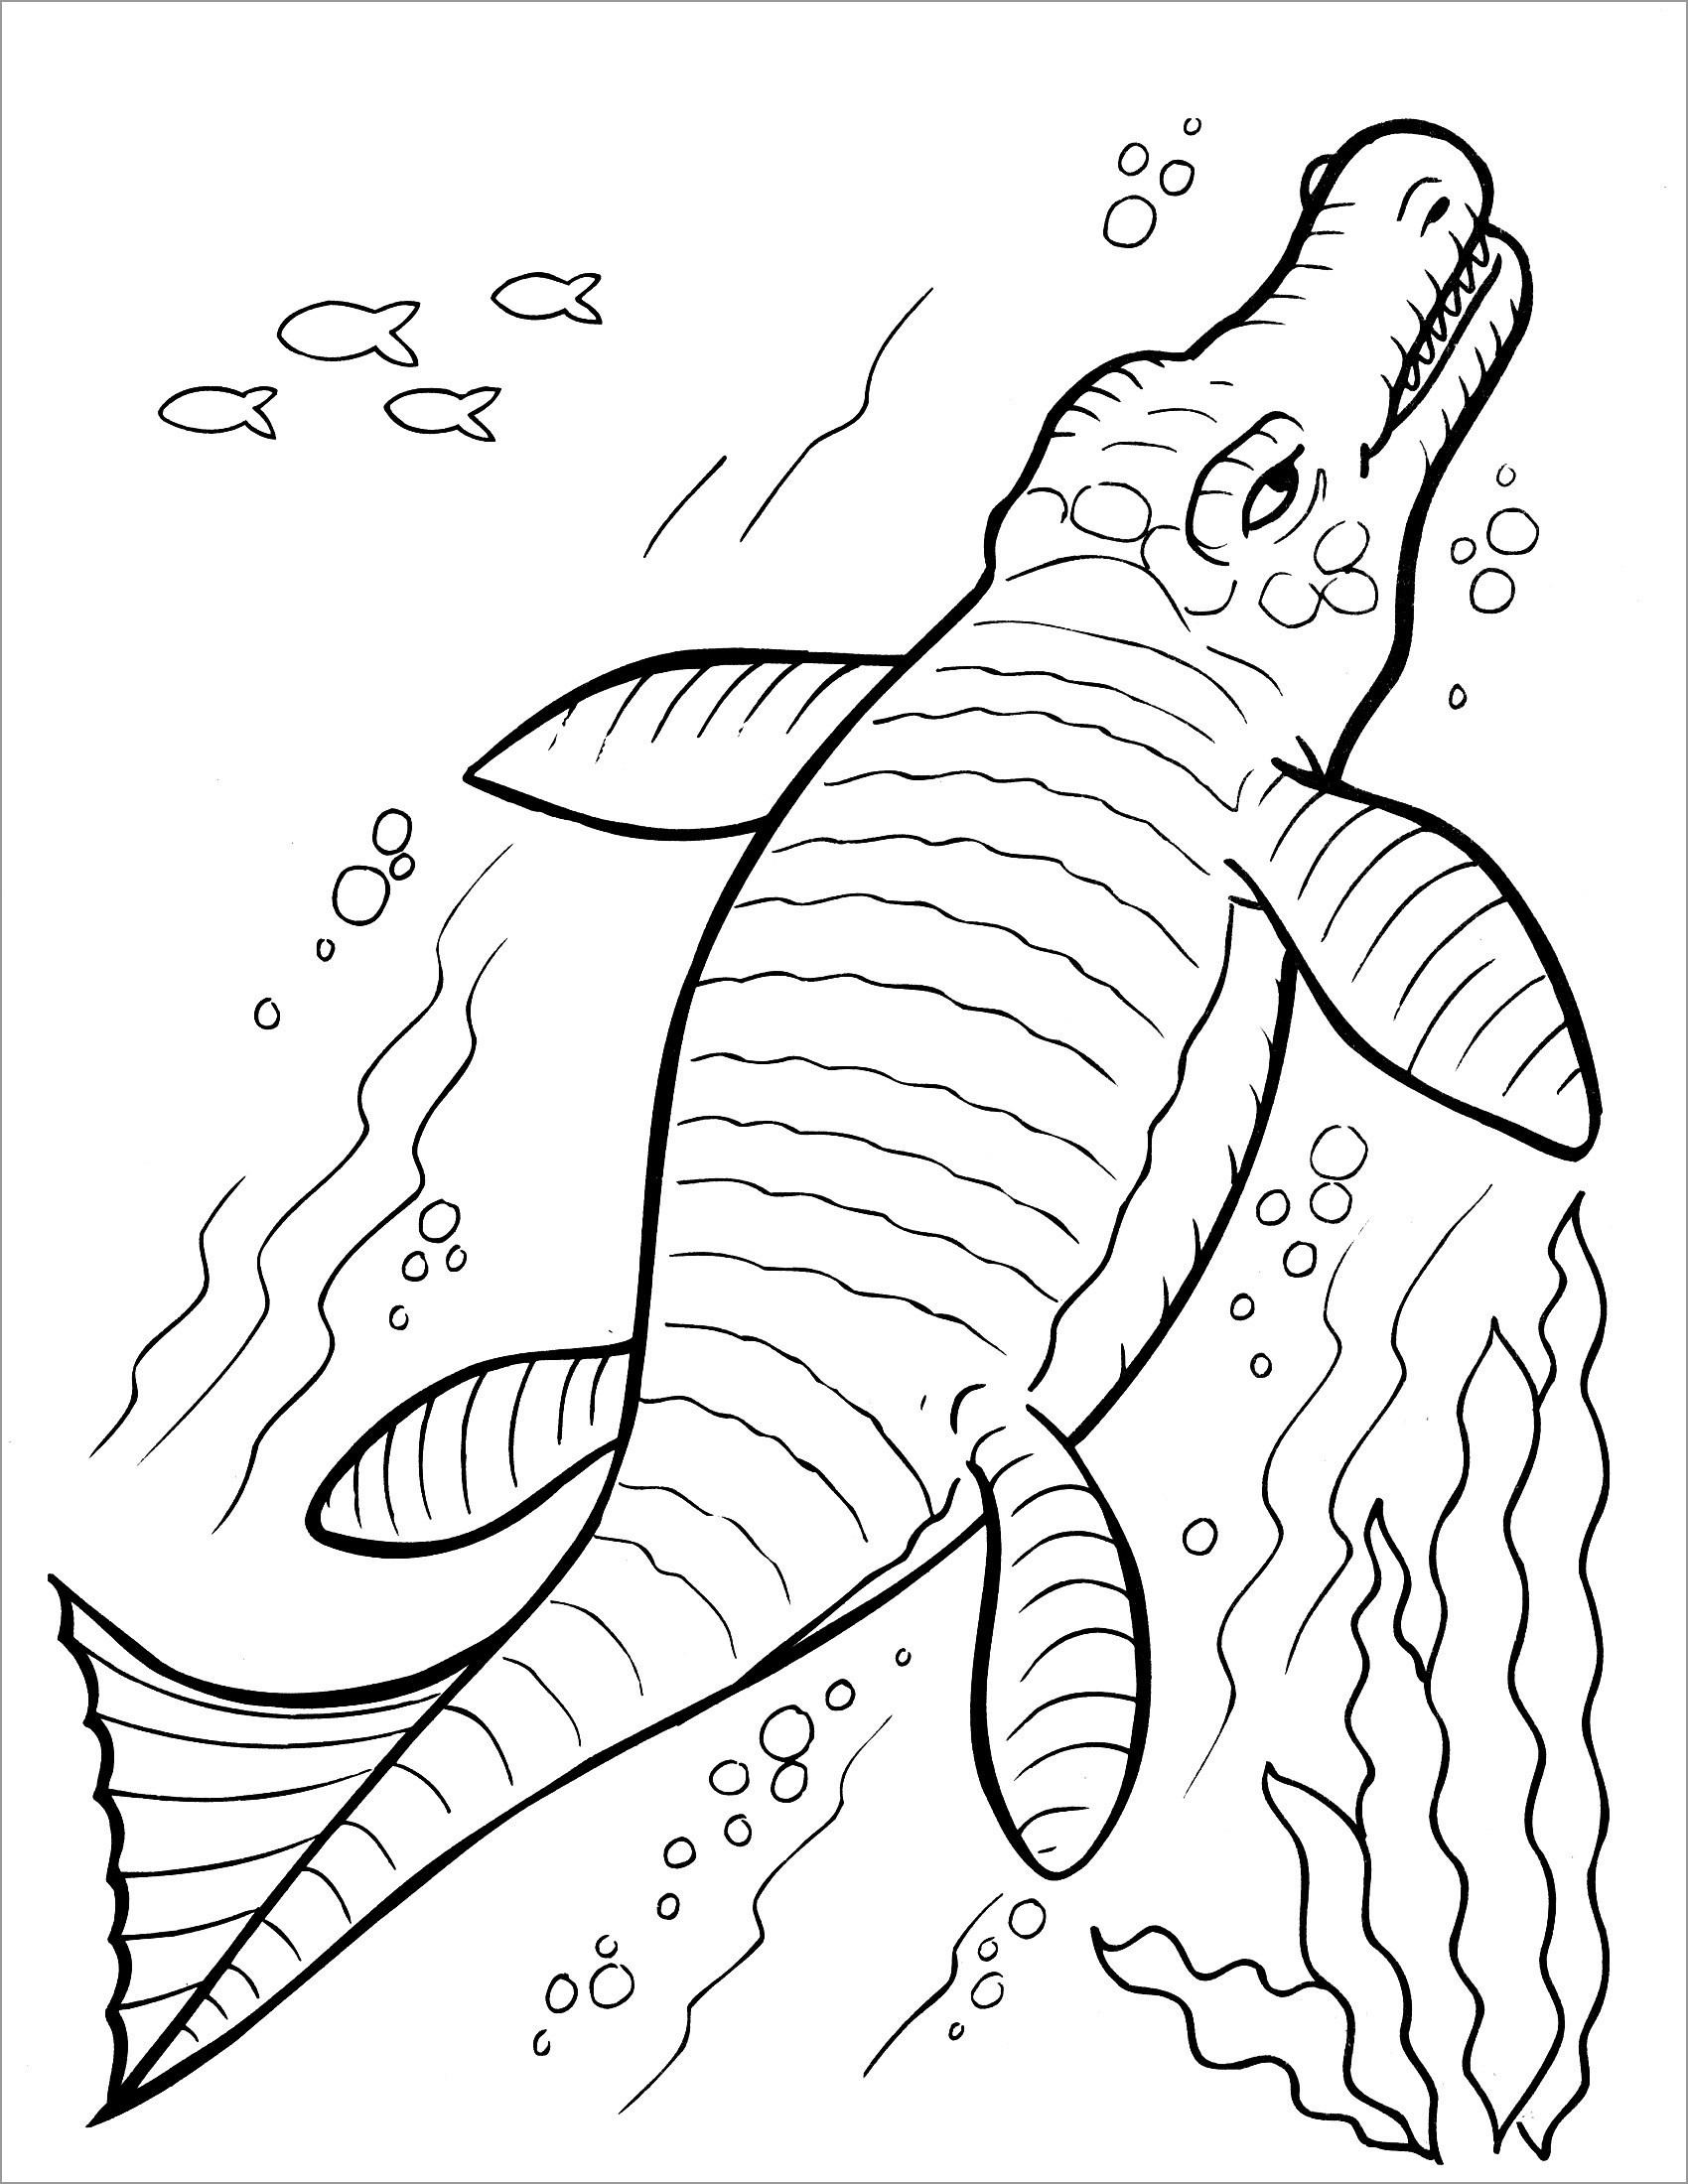 Swimming Dinosaurs Coloring Page